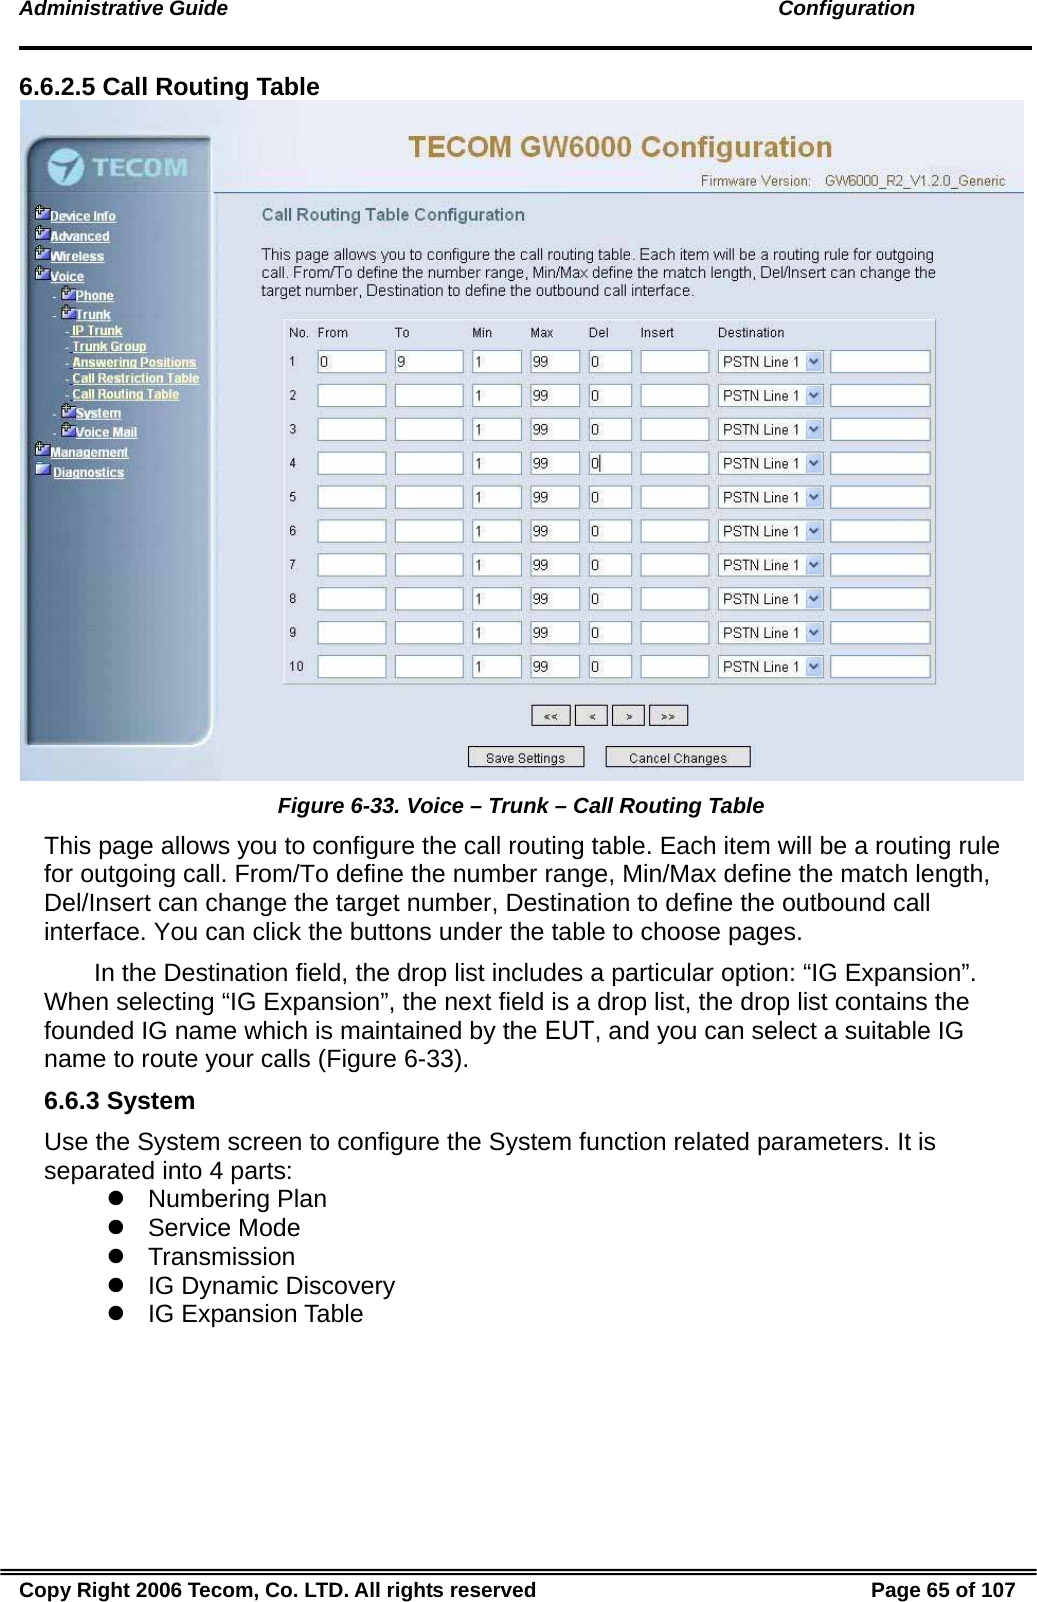 Administrative Guide                                                                                               Configuration 6.6.2.5 Call Routing Table  Figure 6-33. Voice – Trunk – Call Routing Table This page allows you to configure the call routing table. Each item will be a routing rule for outgoing call. From/To define the number range, Min/Max define the match length, Del/Insert can change the target number, Destination to define the outbound call interface. You can click the buttons under the table to choose pages.      In the Destination field, the drop list includes a particular option: “IG Expansion”. When selecting “IG Expansion”, the next field is a drop list, the drop list contains the founded IG name which is maintained by the EUT, and you can select a suitable IG name to route your calls (Figure 6-33). 6.6.3 System Use the System screen to configure the System function related parameters. It is separated into 4 parts: z Numbering Plan z Service Mode z Transmission z  IG Dynamic Discovery z IG Expansion Table Copy Right 2006 Tecom, Co. LTD. All rights reserved  Page 65 of 107 